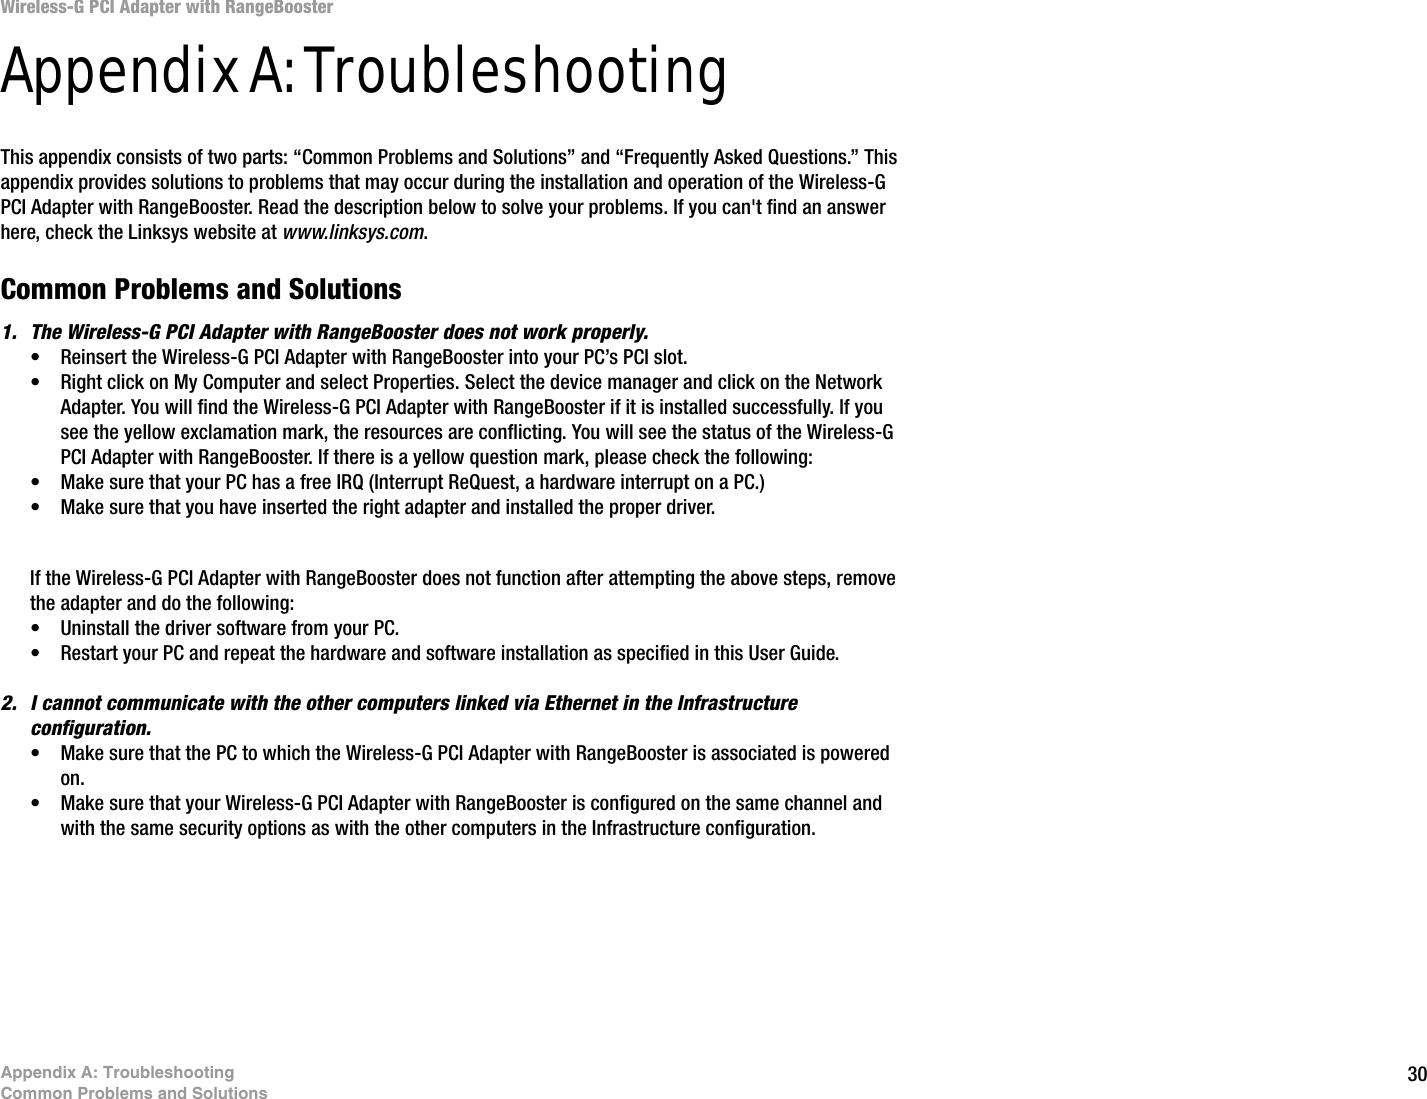 30Appendix A: TroubleshootingCommon Problems and SolutionsWireless-G PCI Adapter with RangeBoosterAppendix A: TroubleshootingThis appendix consists of two parts: “Common Problems and Solutions” and “Frequently Asked Questions.” This appendix provides solutions to problems that may occur during the installation and operation of the Wireless-G PCI Adapter with RangeBooster. Read the description below to solve your problems. If you can&apos;t find an answer here, check the Linksys website at www.linksys.com.Common Problems and Solutions1. The Wireless-G PCI Adapter with RangeBooster does not work properly.• Reinsert the Wireless-G PCI Adapter with RangeBooster into your PC’s PCI slot.• Right click on My Computer and select Properties. Select the device manager and click on the Network Adapter. You will find the Wireless-G PCI Adapter with RangeBooster if it is installed successfully. If you see the yellow exclamation mark, the resources are conflicting. You will see the status of the Wireless-G PCI Adapter with RangeBooster. If there is a yellow question mark, please check the following:• Make sure that your PC has a free IRQ (Interrupt ReQuest, a hardware interrupt on a PC.) • Make sure that you have inserted the right adapter and installed the proper driver.If the Wireless-G PCI Adapter with RangeBooster does not function after attempting the above steps, remove the adapter and do the following:• Uninstall the driver software from your PC.• Restart your PC and repeat the hardware and software installation as specified in this User Guide.2. I cannot communicate with the other computers linked via Ethernet in the Infrastructure configuration.• Make sure that the PC to which the Wireless-G PCI Adapter with RangeBooster is associated is powered on.• Make sure that your Wireless-G PCI Adapter with RangeBooster is configured on the same channel and with the same security options as with the other computers in the Infrastructure configuration. 